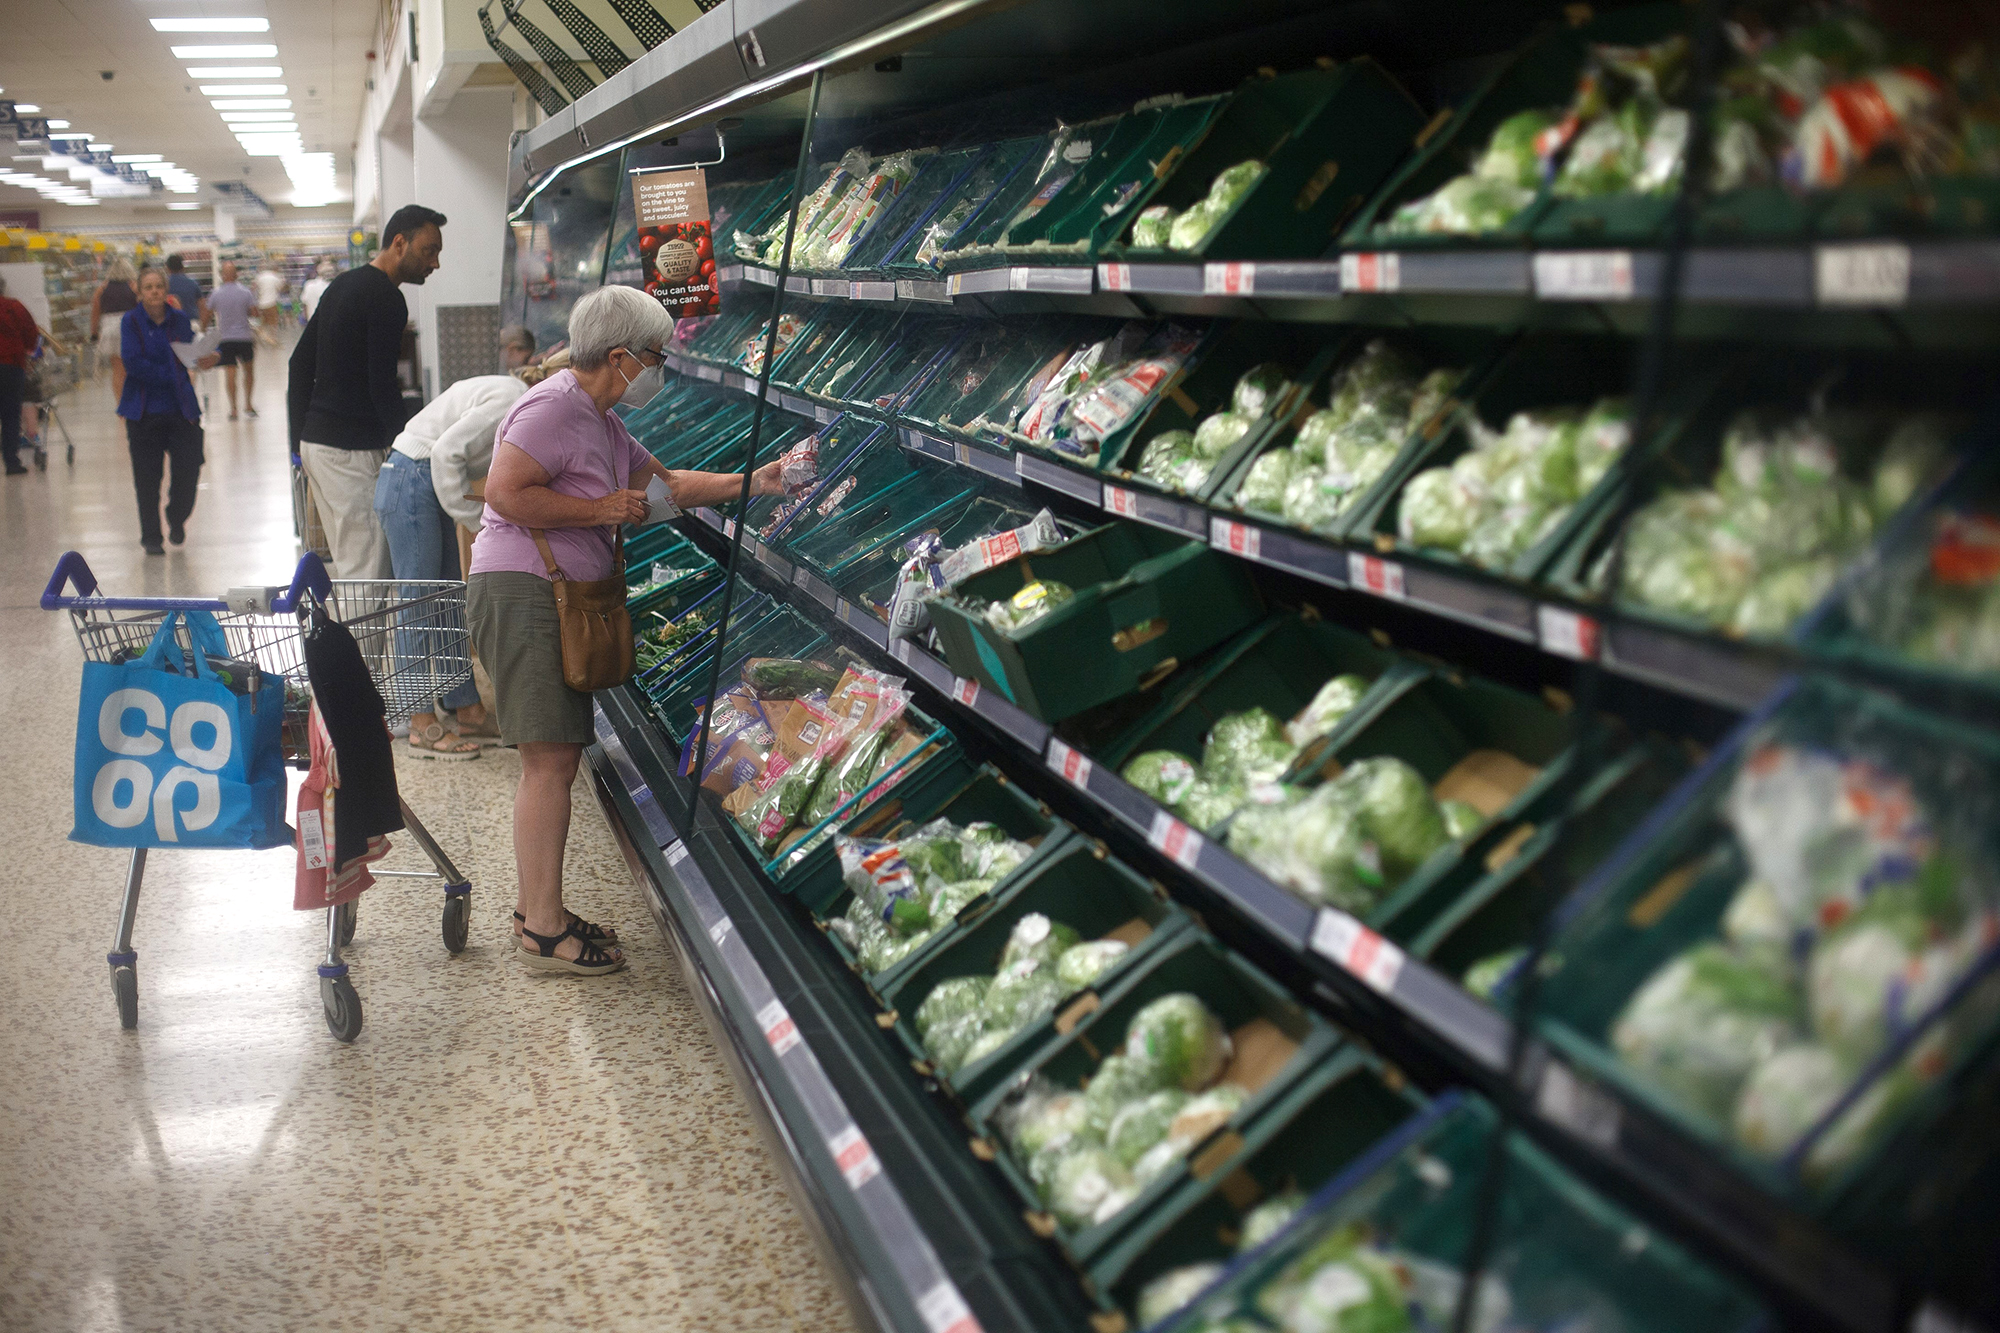 People purchase goods at a supermarket in Reading, Britain on August 21.